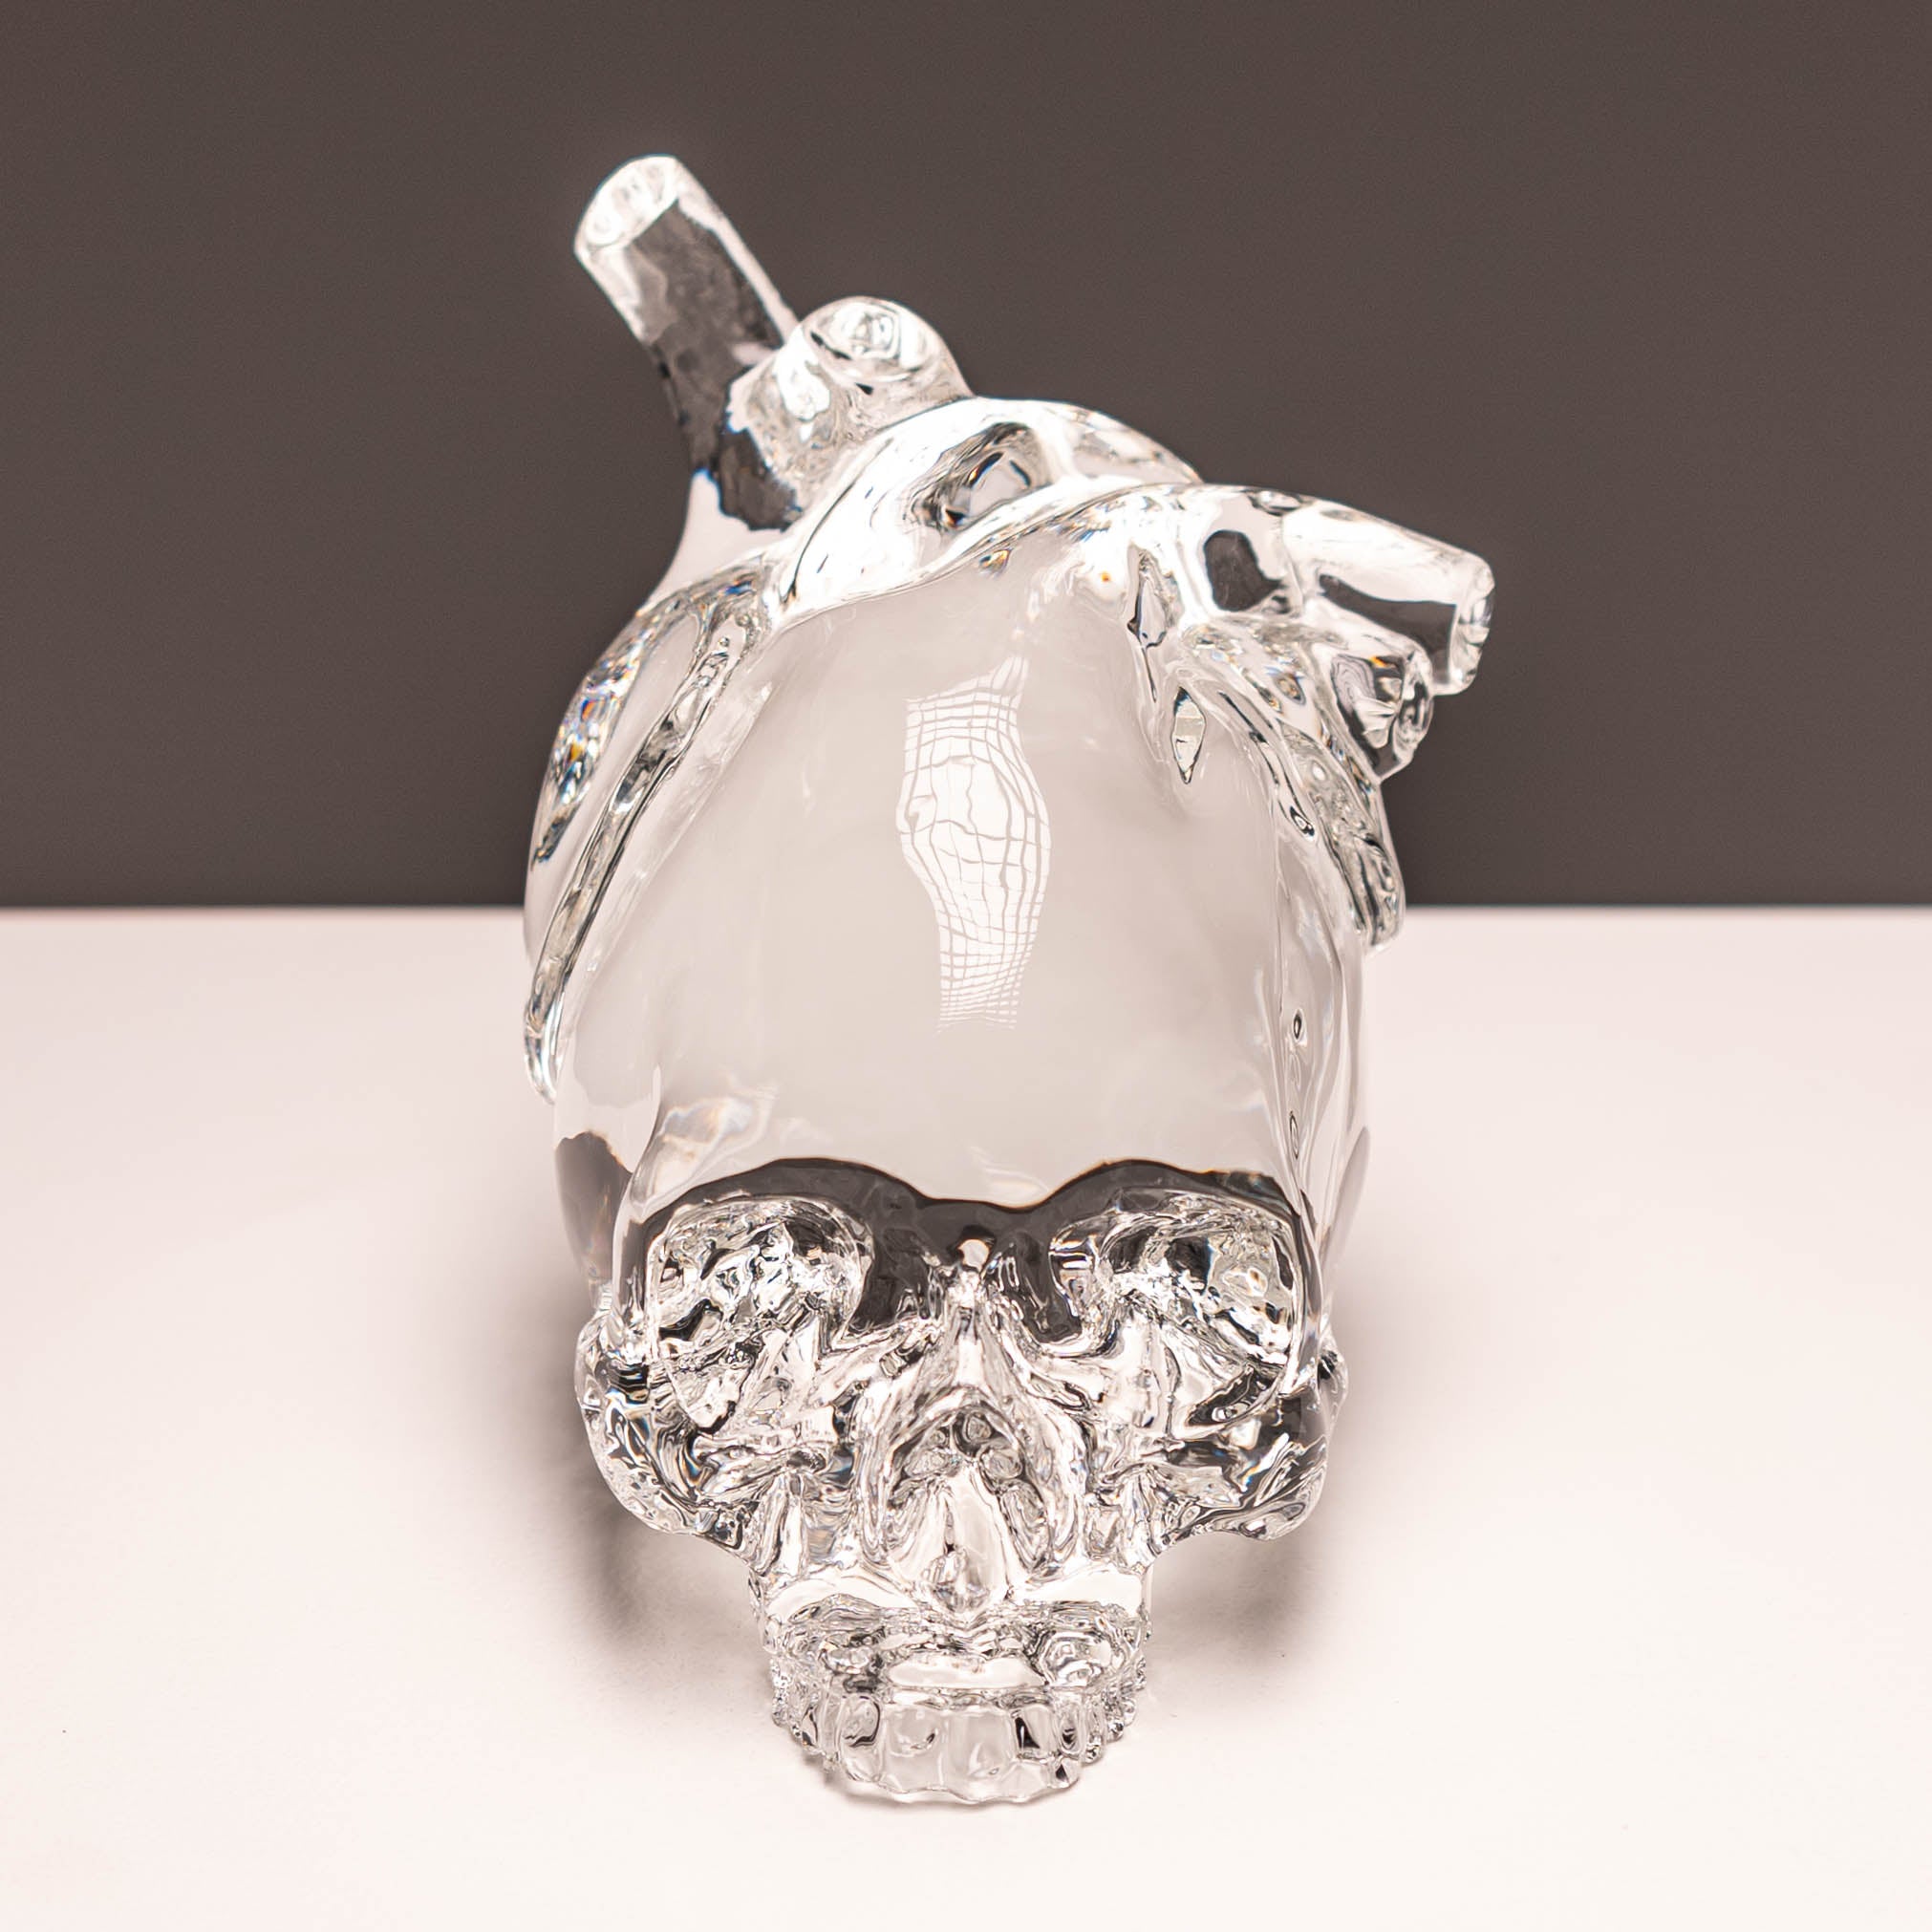 Cold Hearted - Crystal Skull